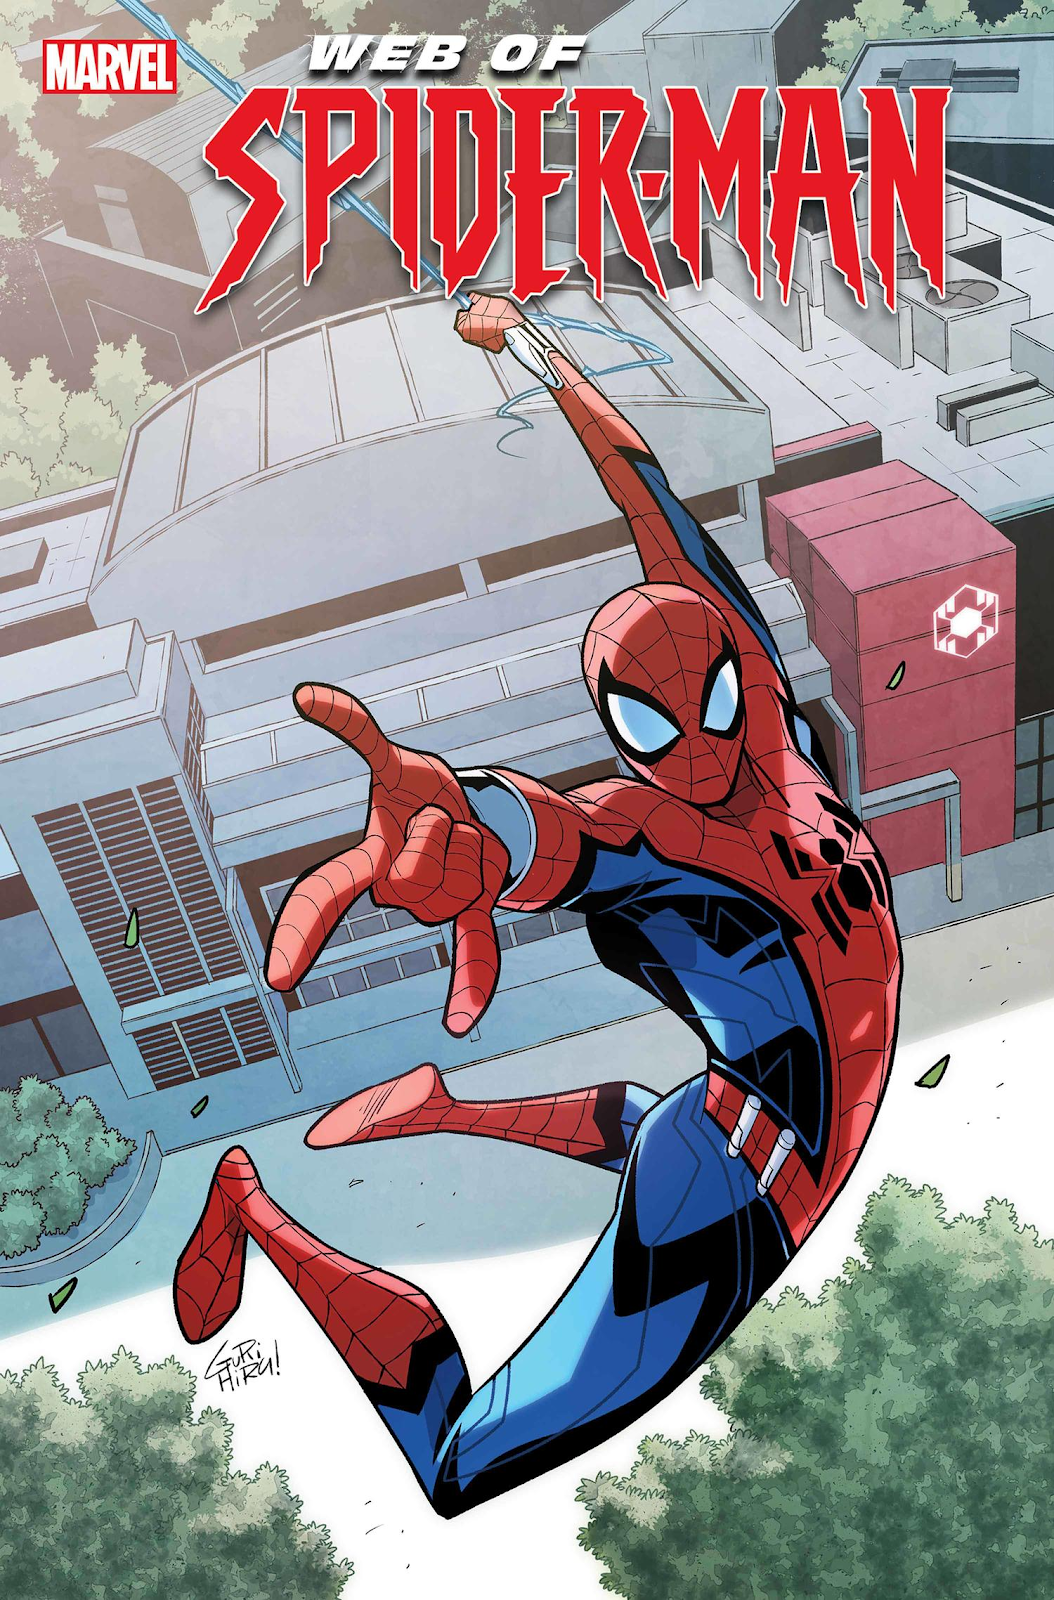 Marvel Announces New Spider-Man Comic Series Based on Avengers Campus at  Disneyland 